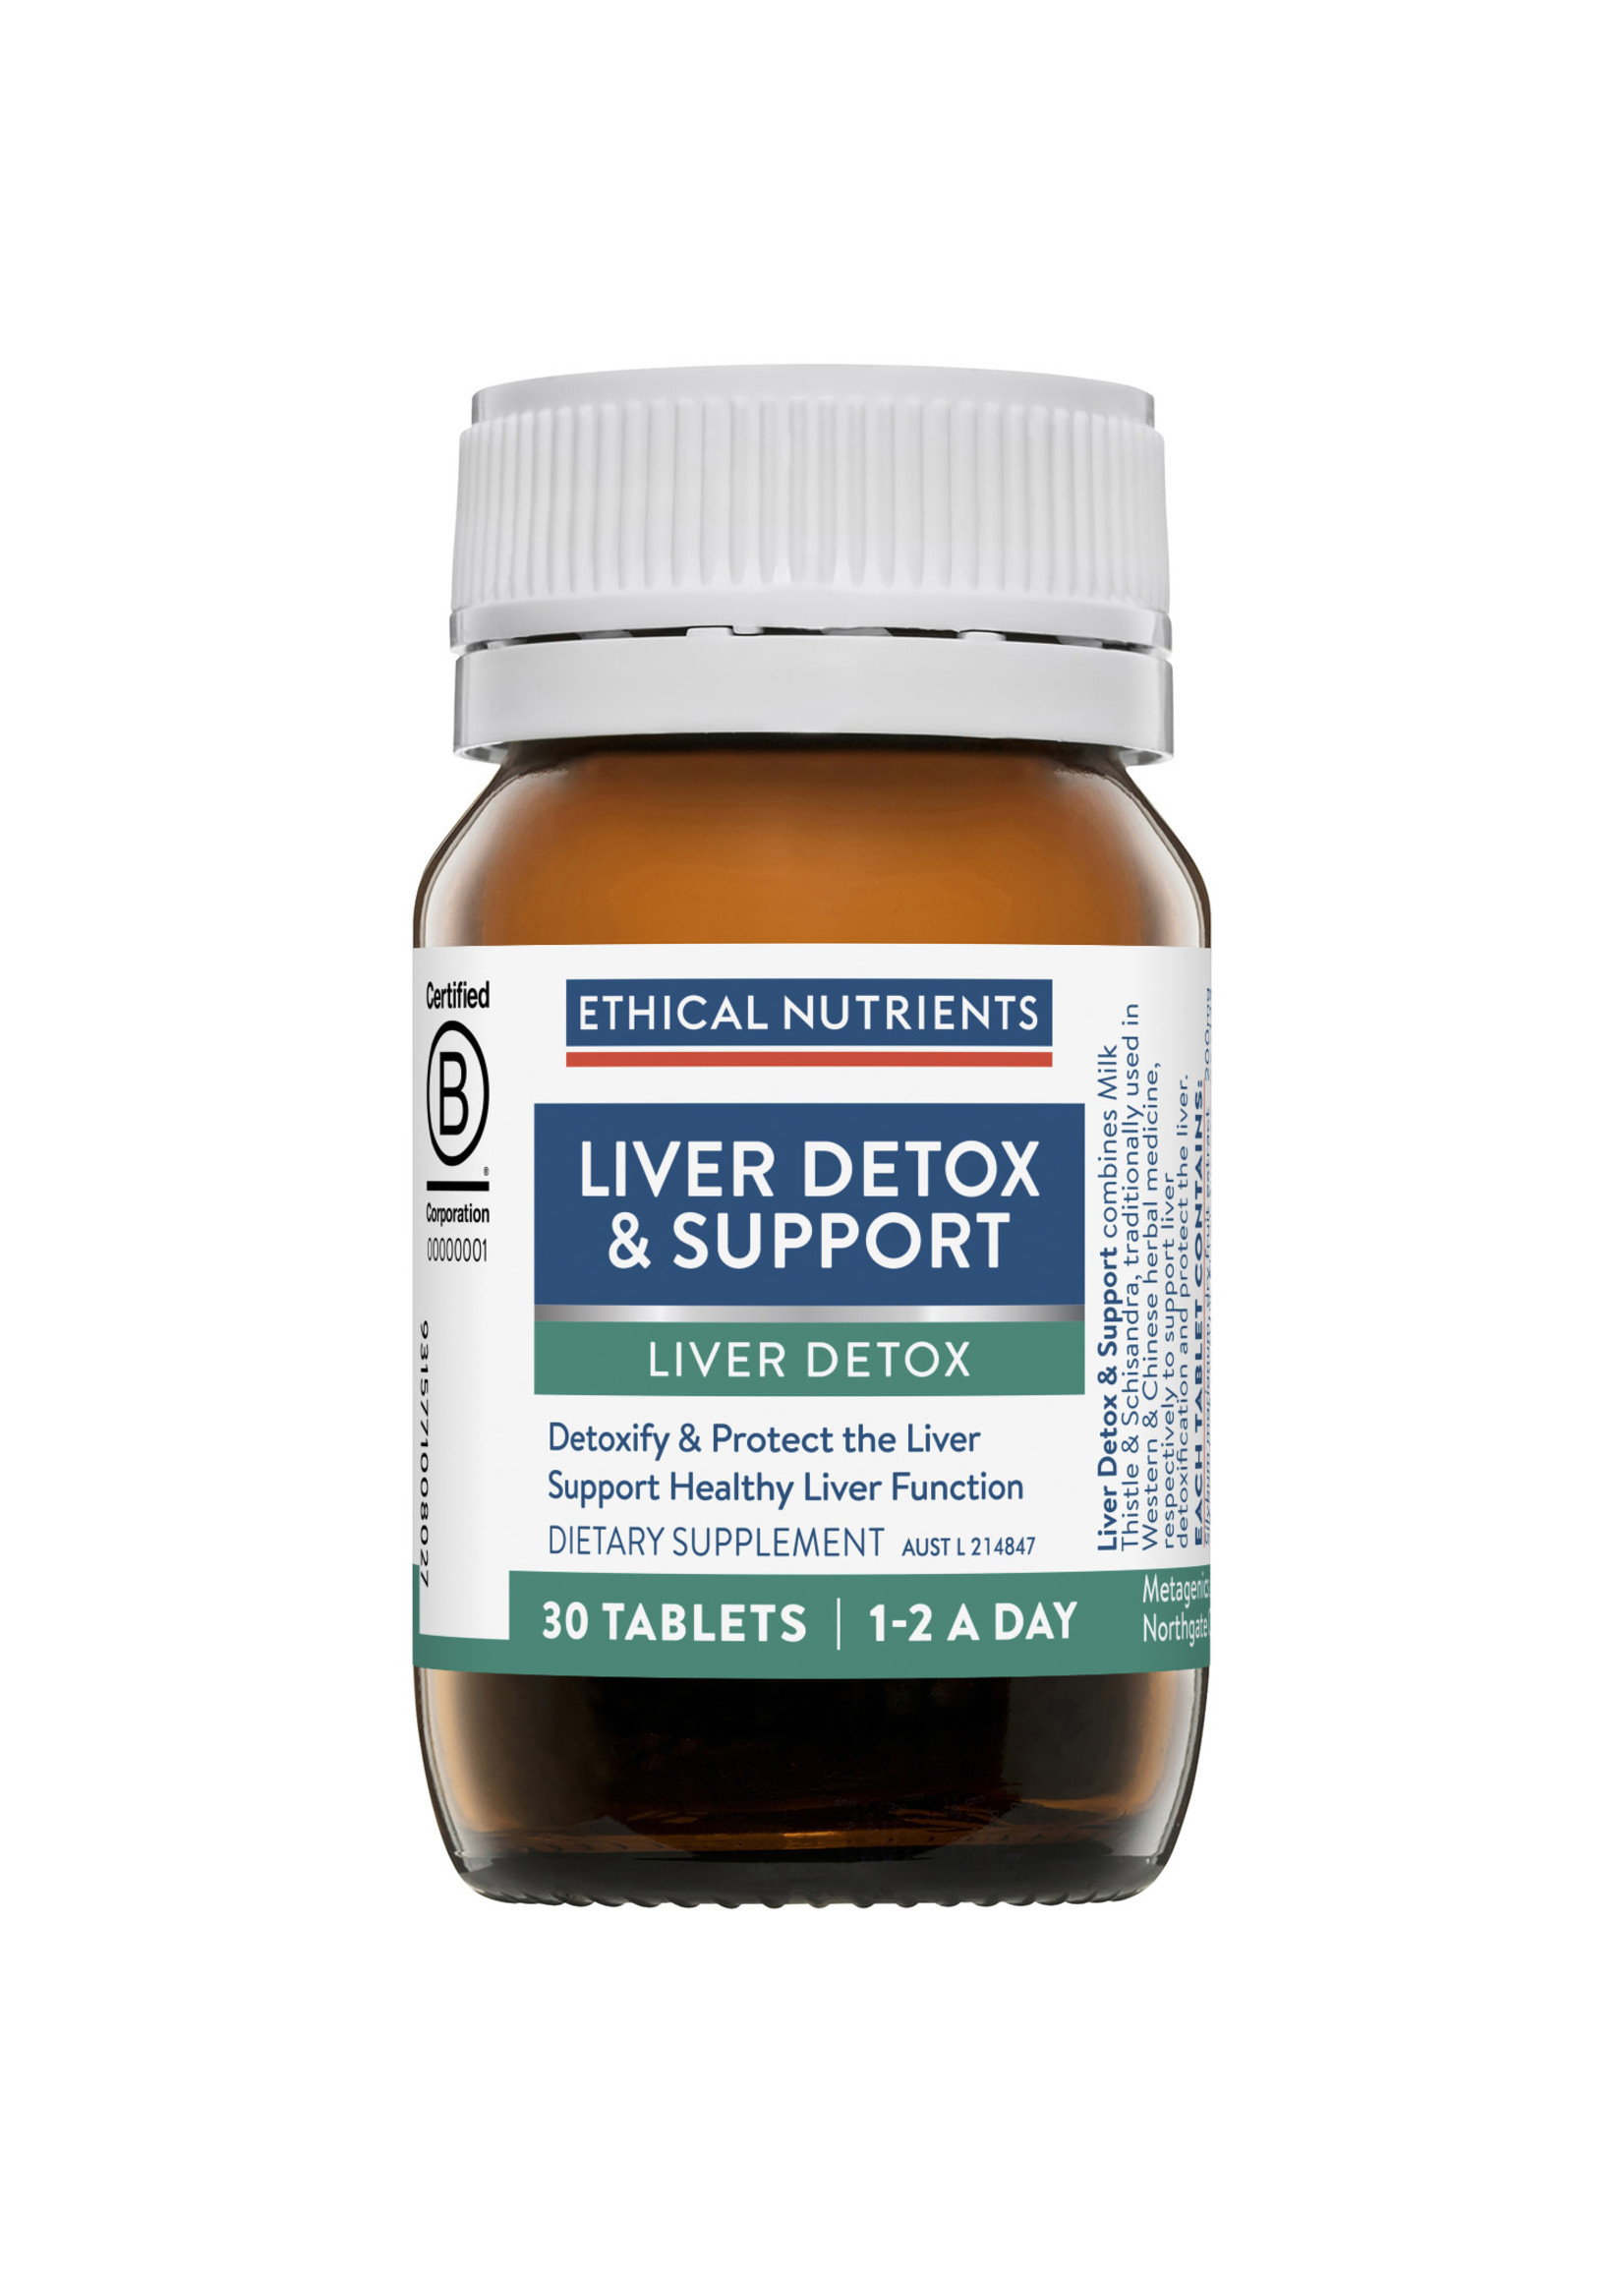 ETHICAL NUTRIENTS Ethical Nutrients Liver Detox & Support 30 tabs